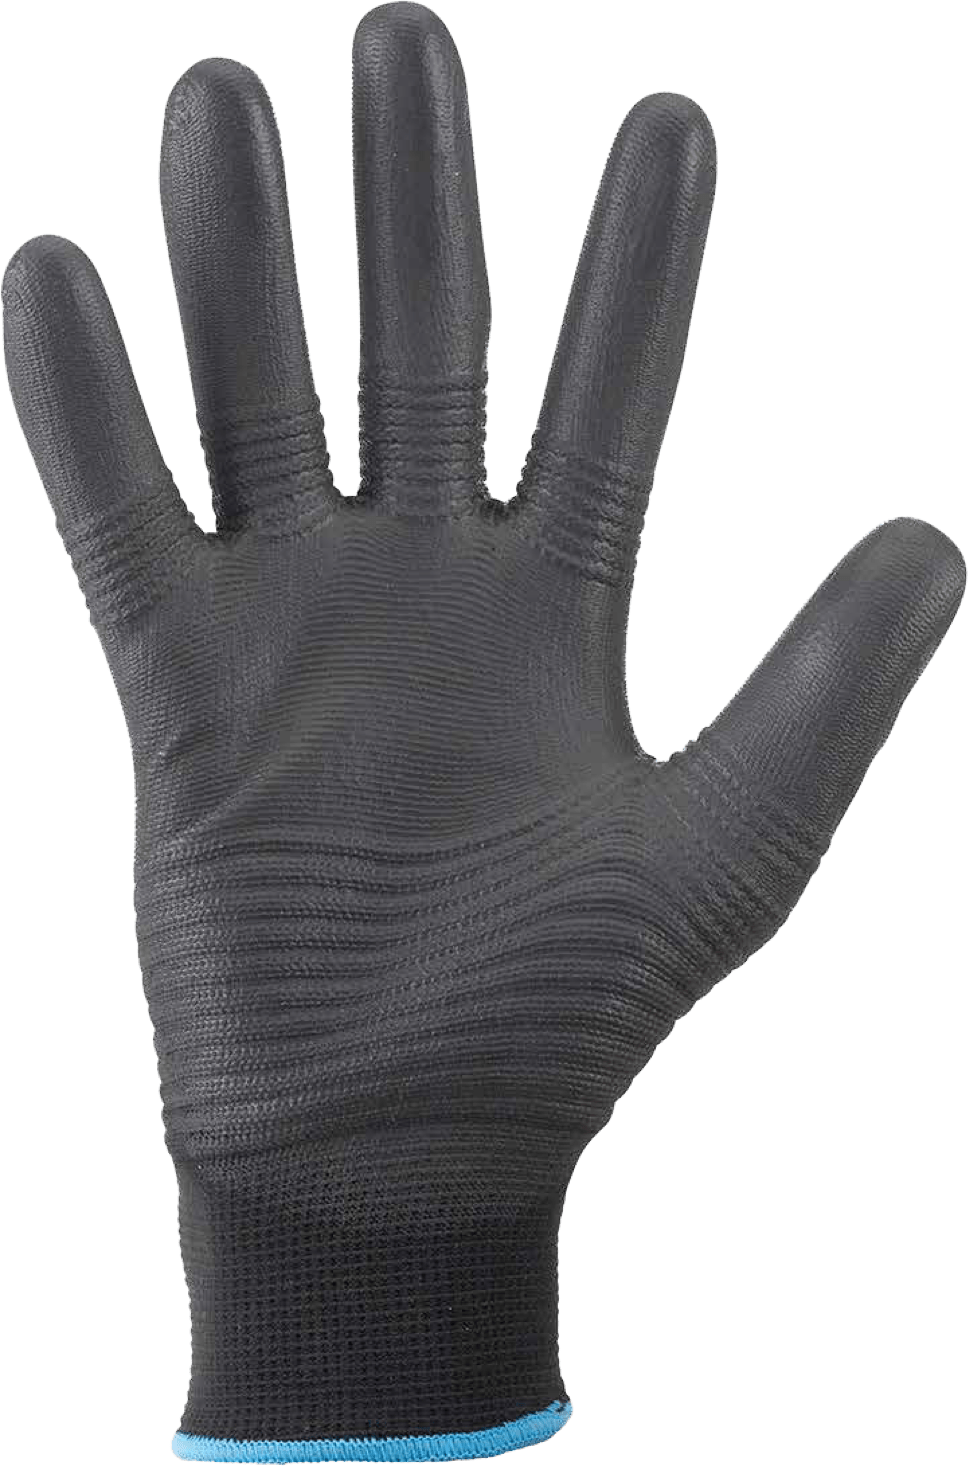 https://www.gorillagripgloves.com/wp-content/uploads/2022/04/rubber_glove_extreme.png